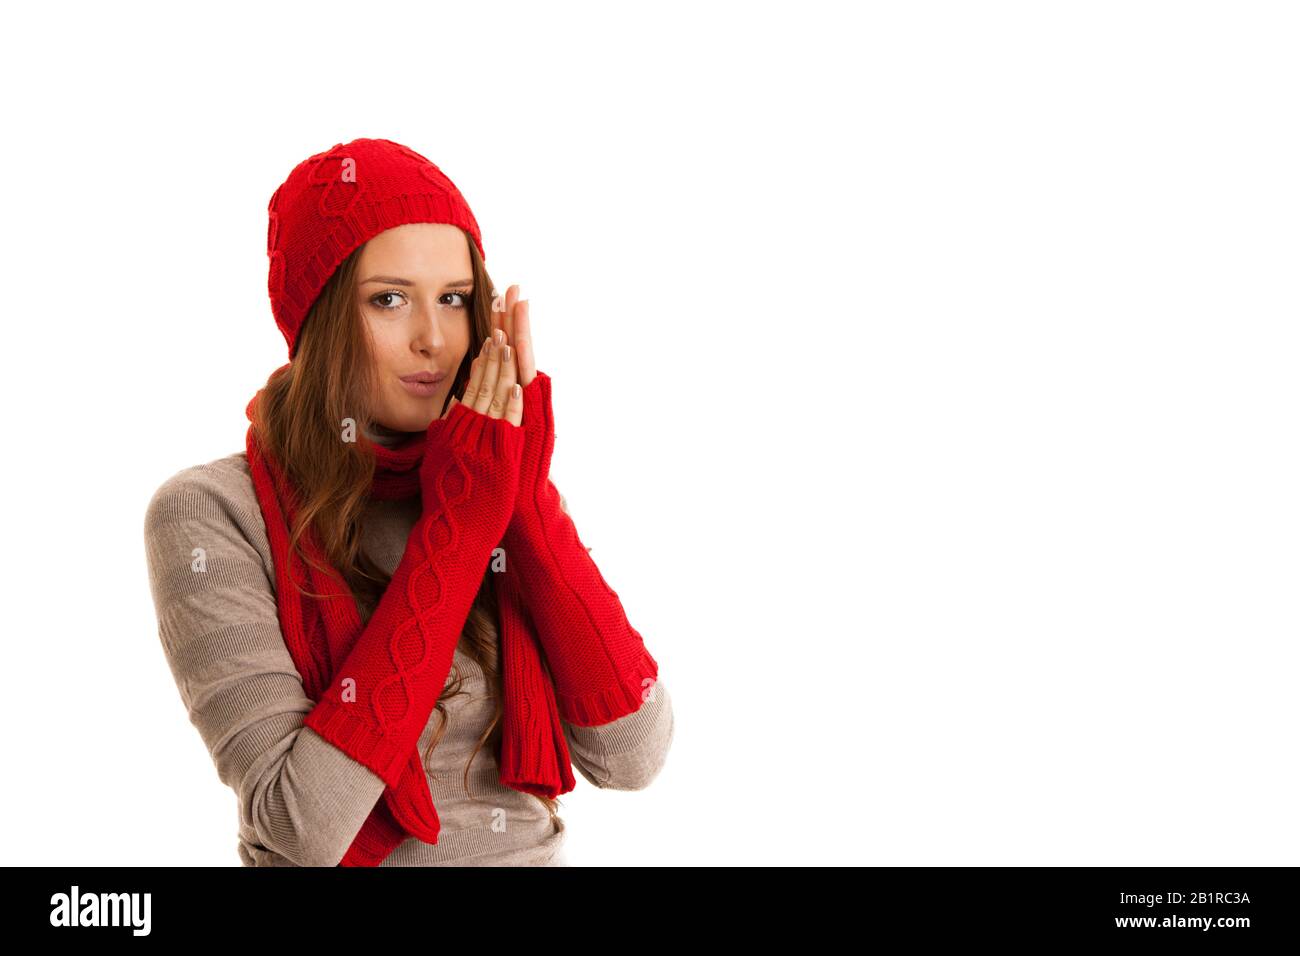 Beautiful young woman in sweater, hat and scarf gestures cold temperatures Stock Photo